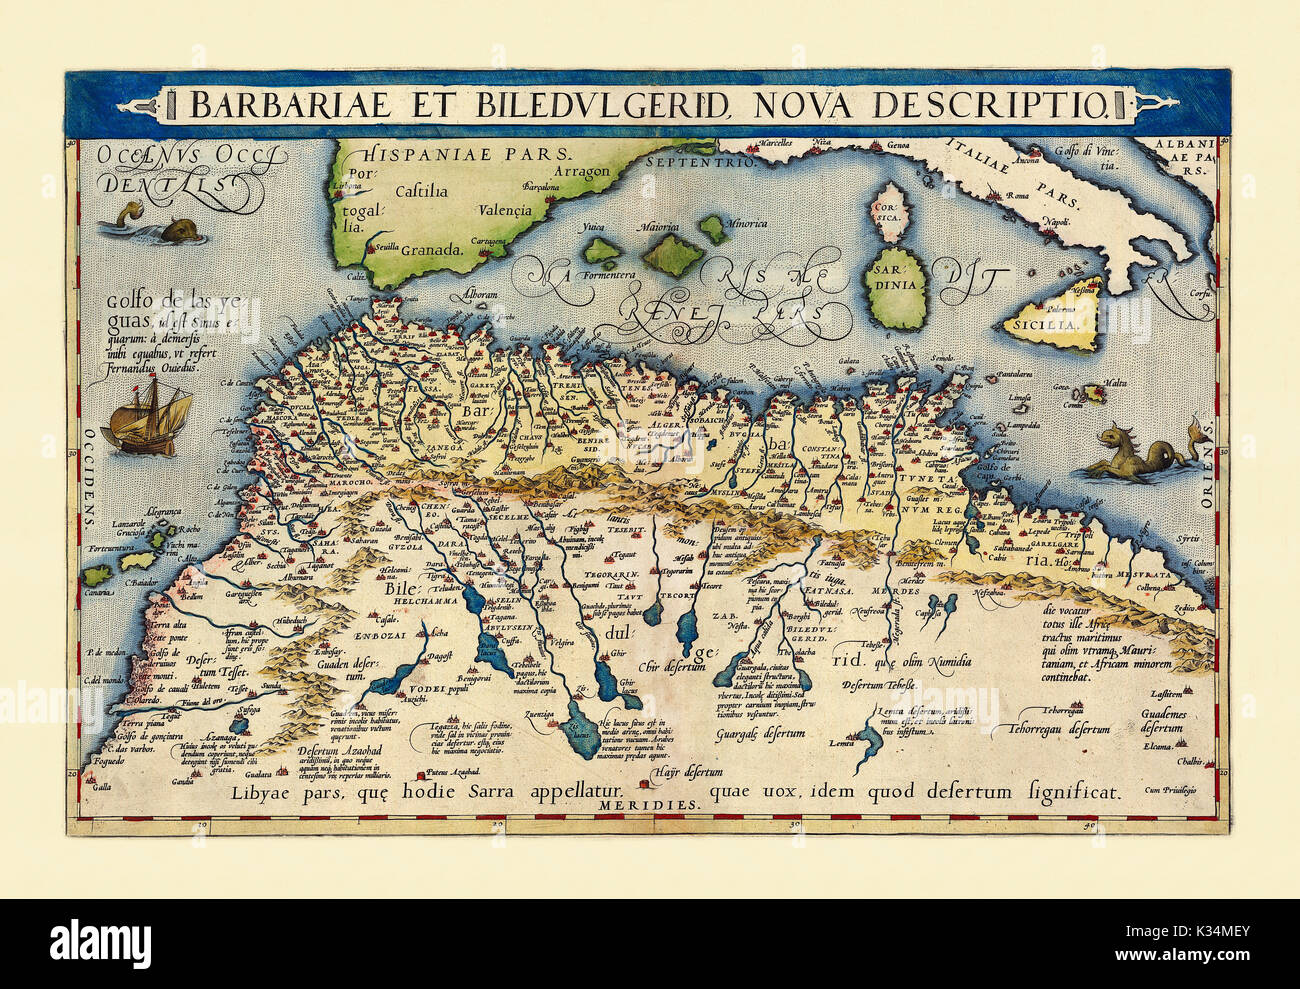 Old map of North Africa. Excellent state of preservation realized in ancient style. All the graphic composition is inside a frame. By Ortelius, Theatrum Orbis Terrarum, Antwerp, 1570 Stock Photo